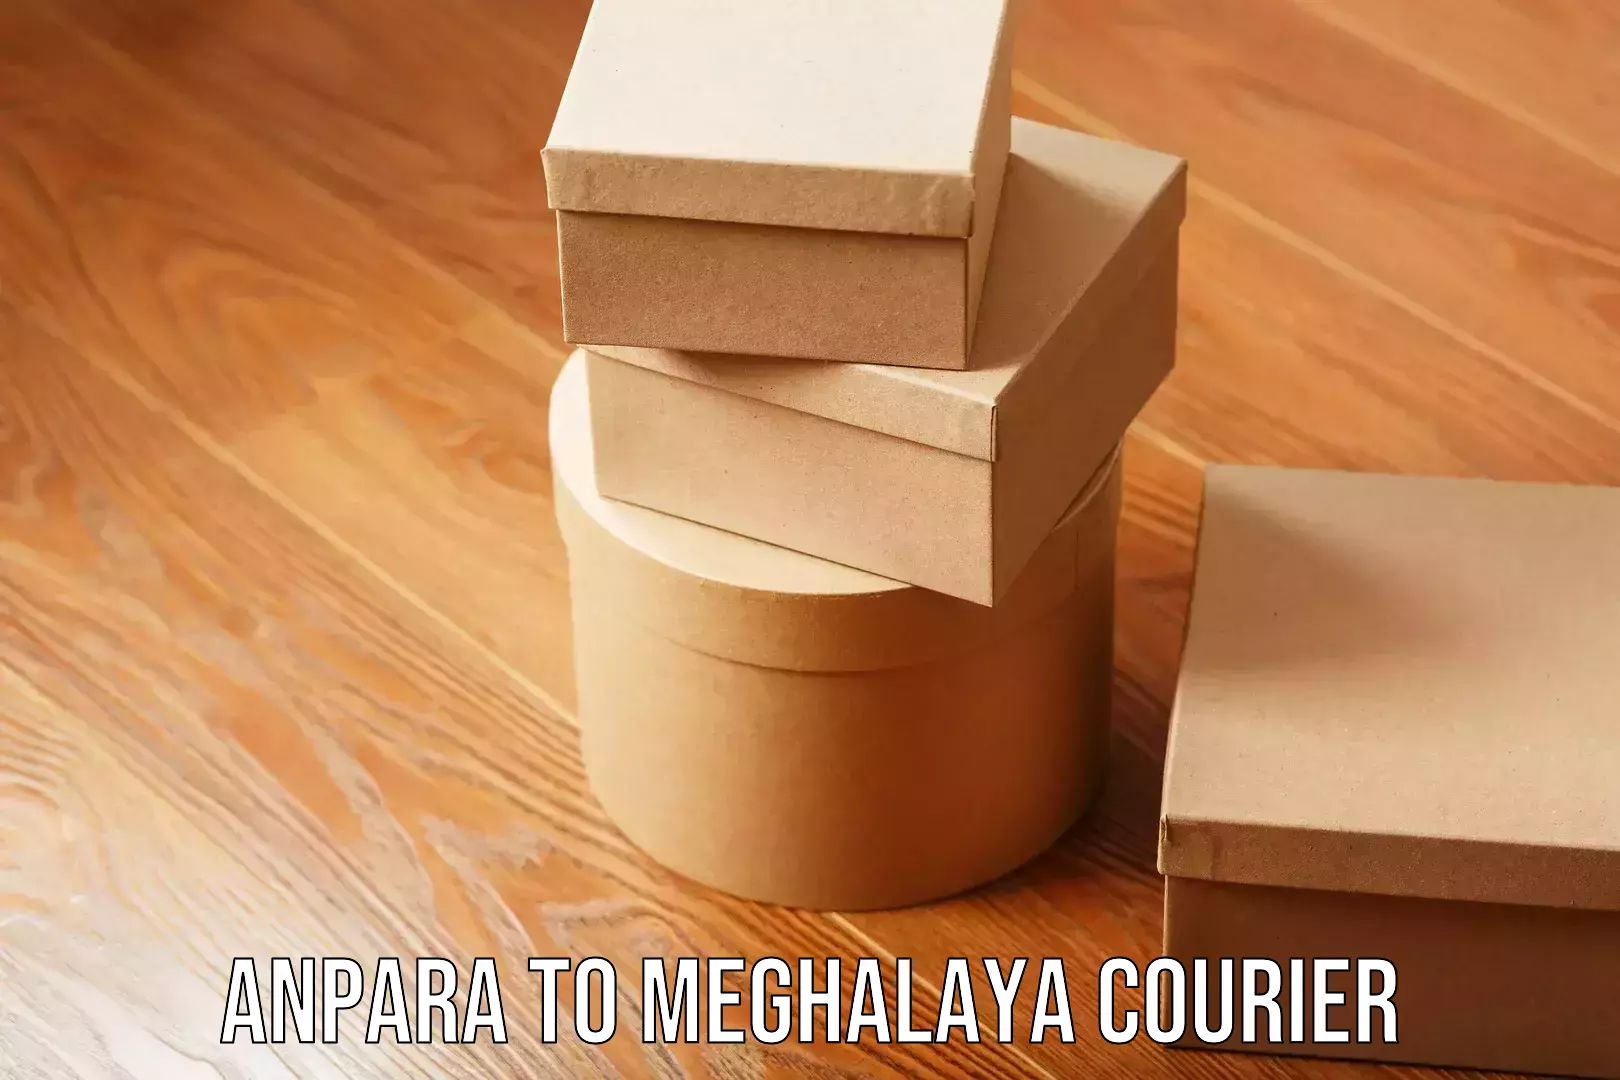 Reliable courier service Anpara to Meghalaya